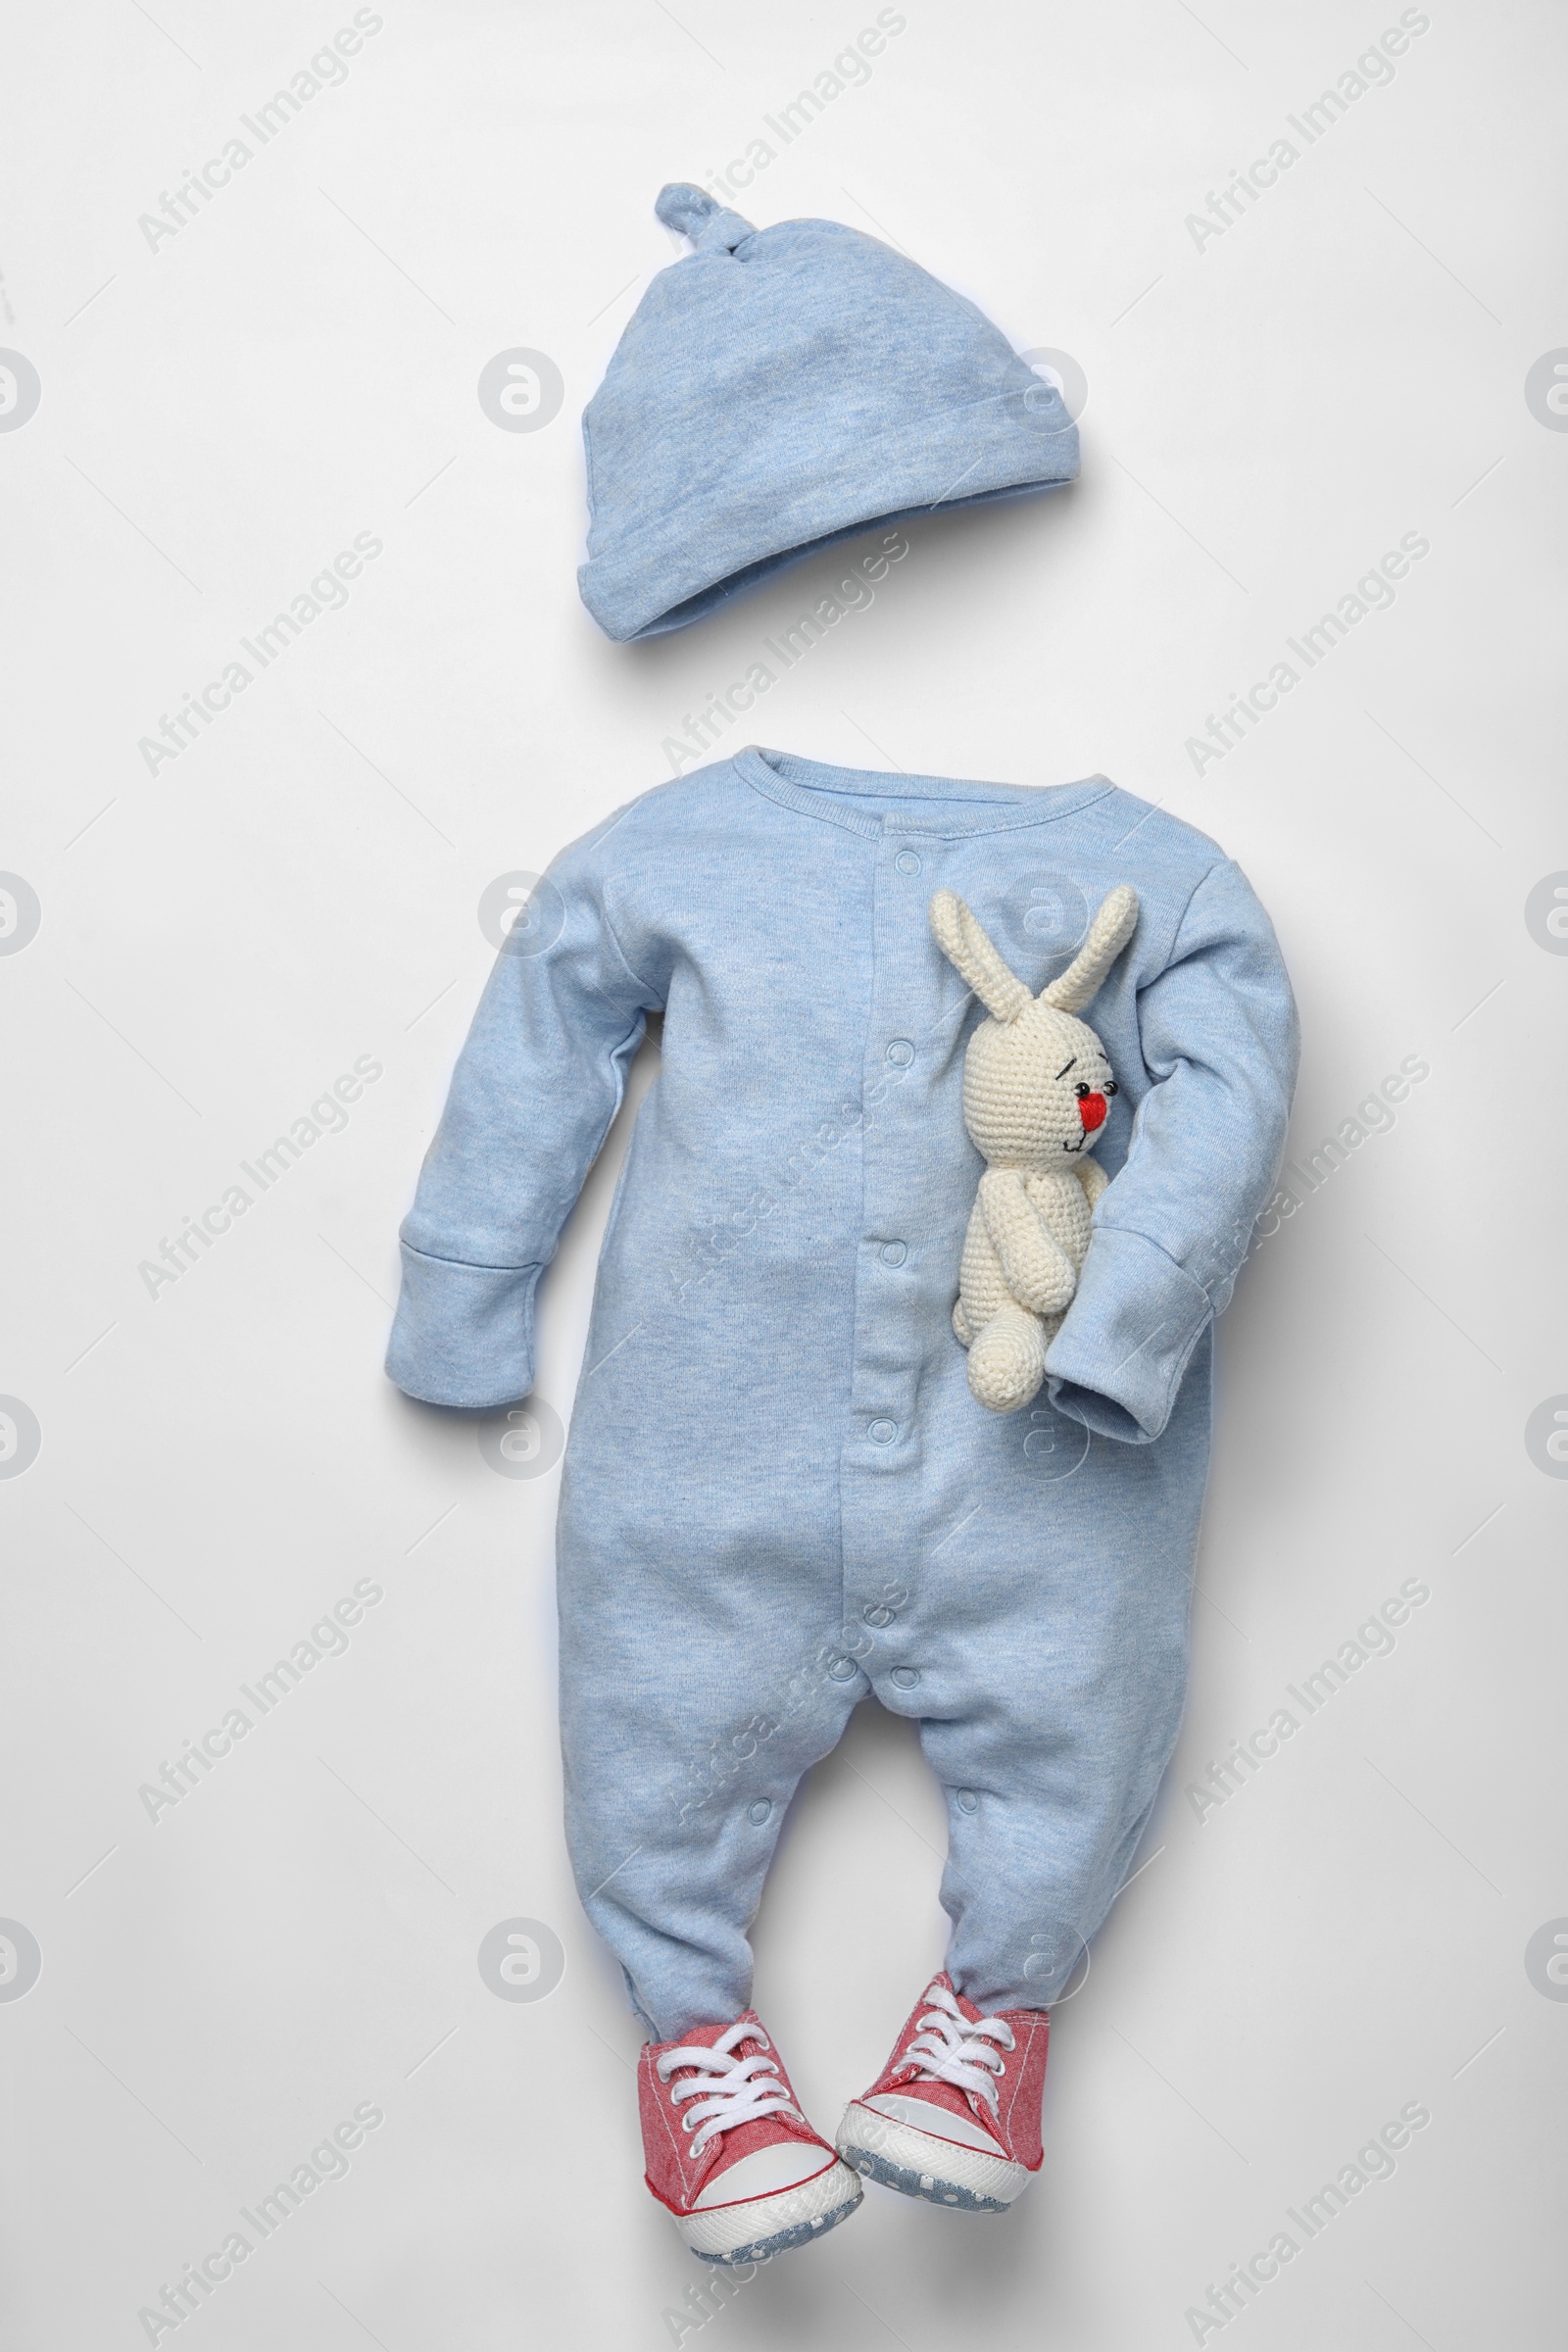 Photo of Child's clothes, booties and toy bunny on white wooden background, flat lay